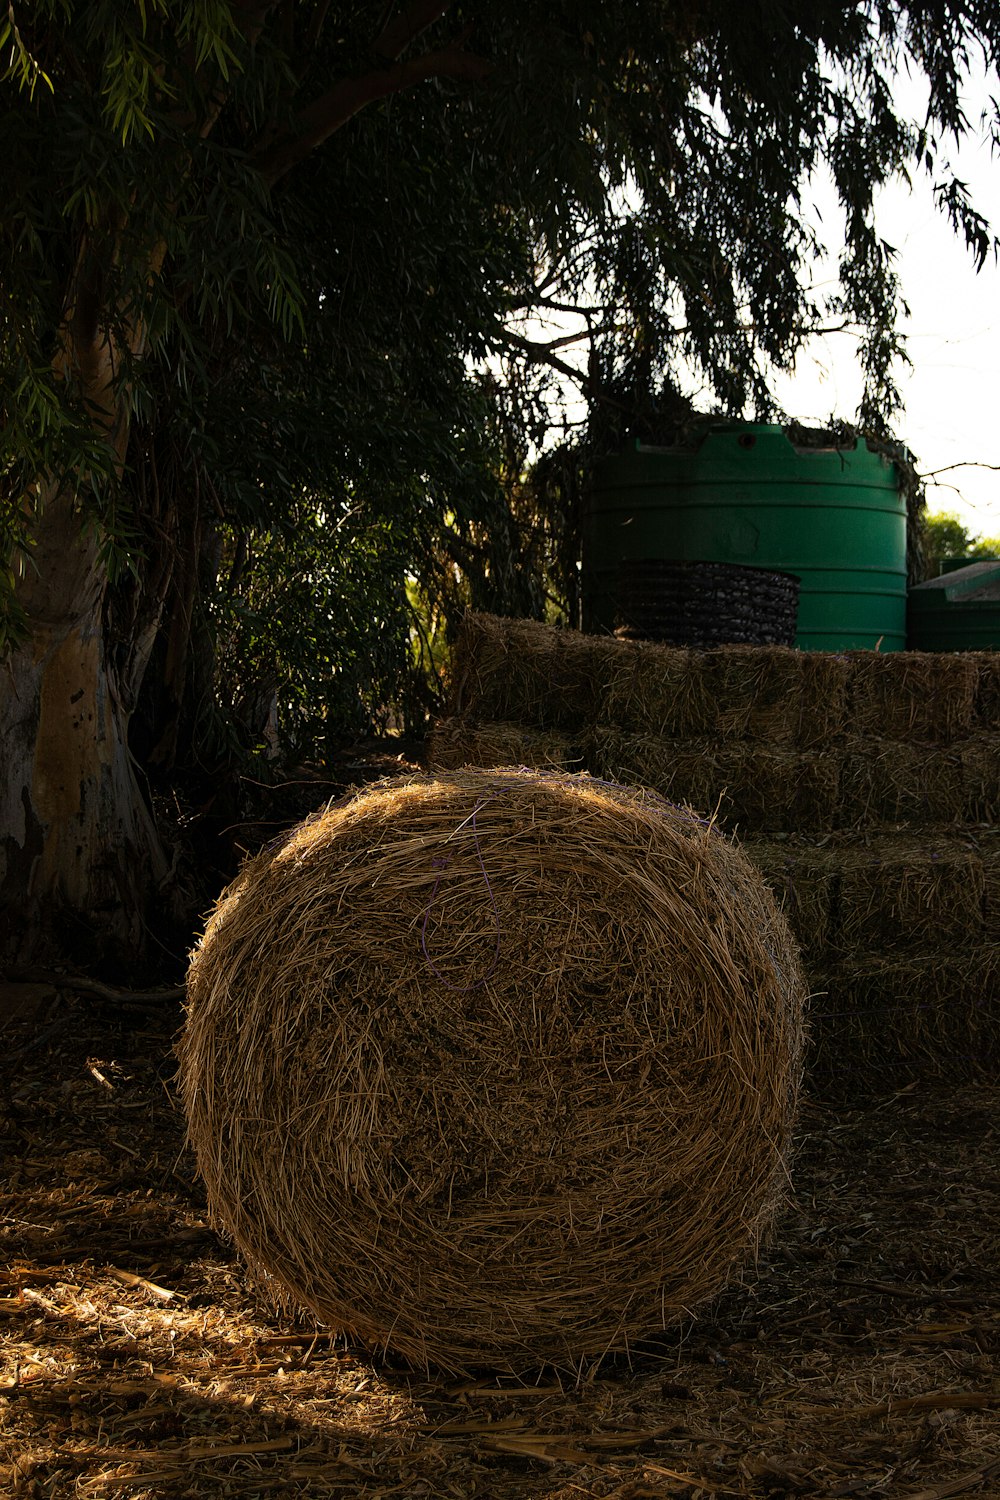 hay bales in a field with a tractor in the background